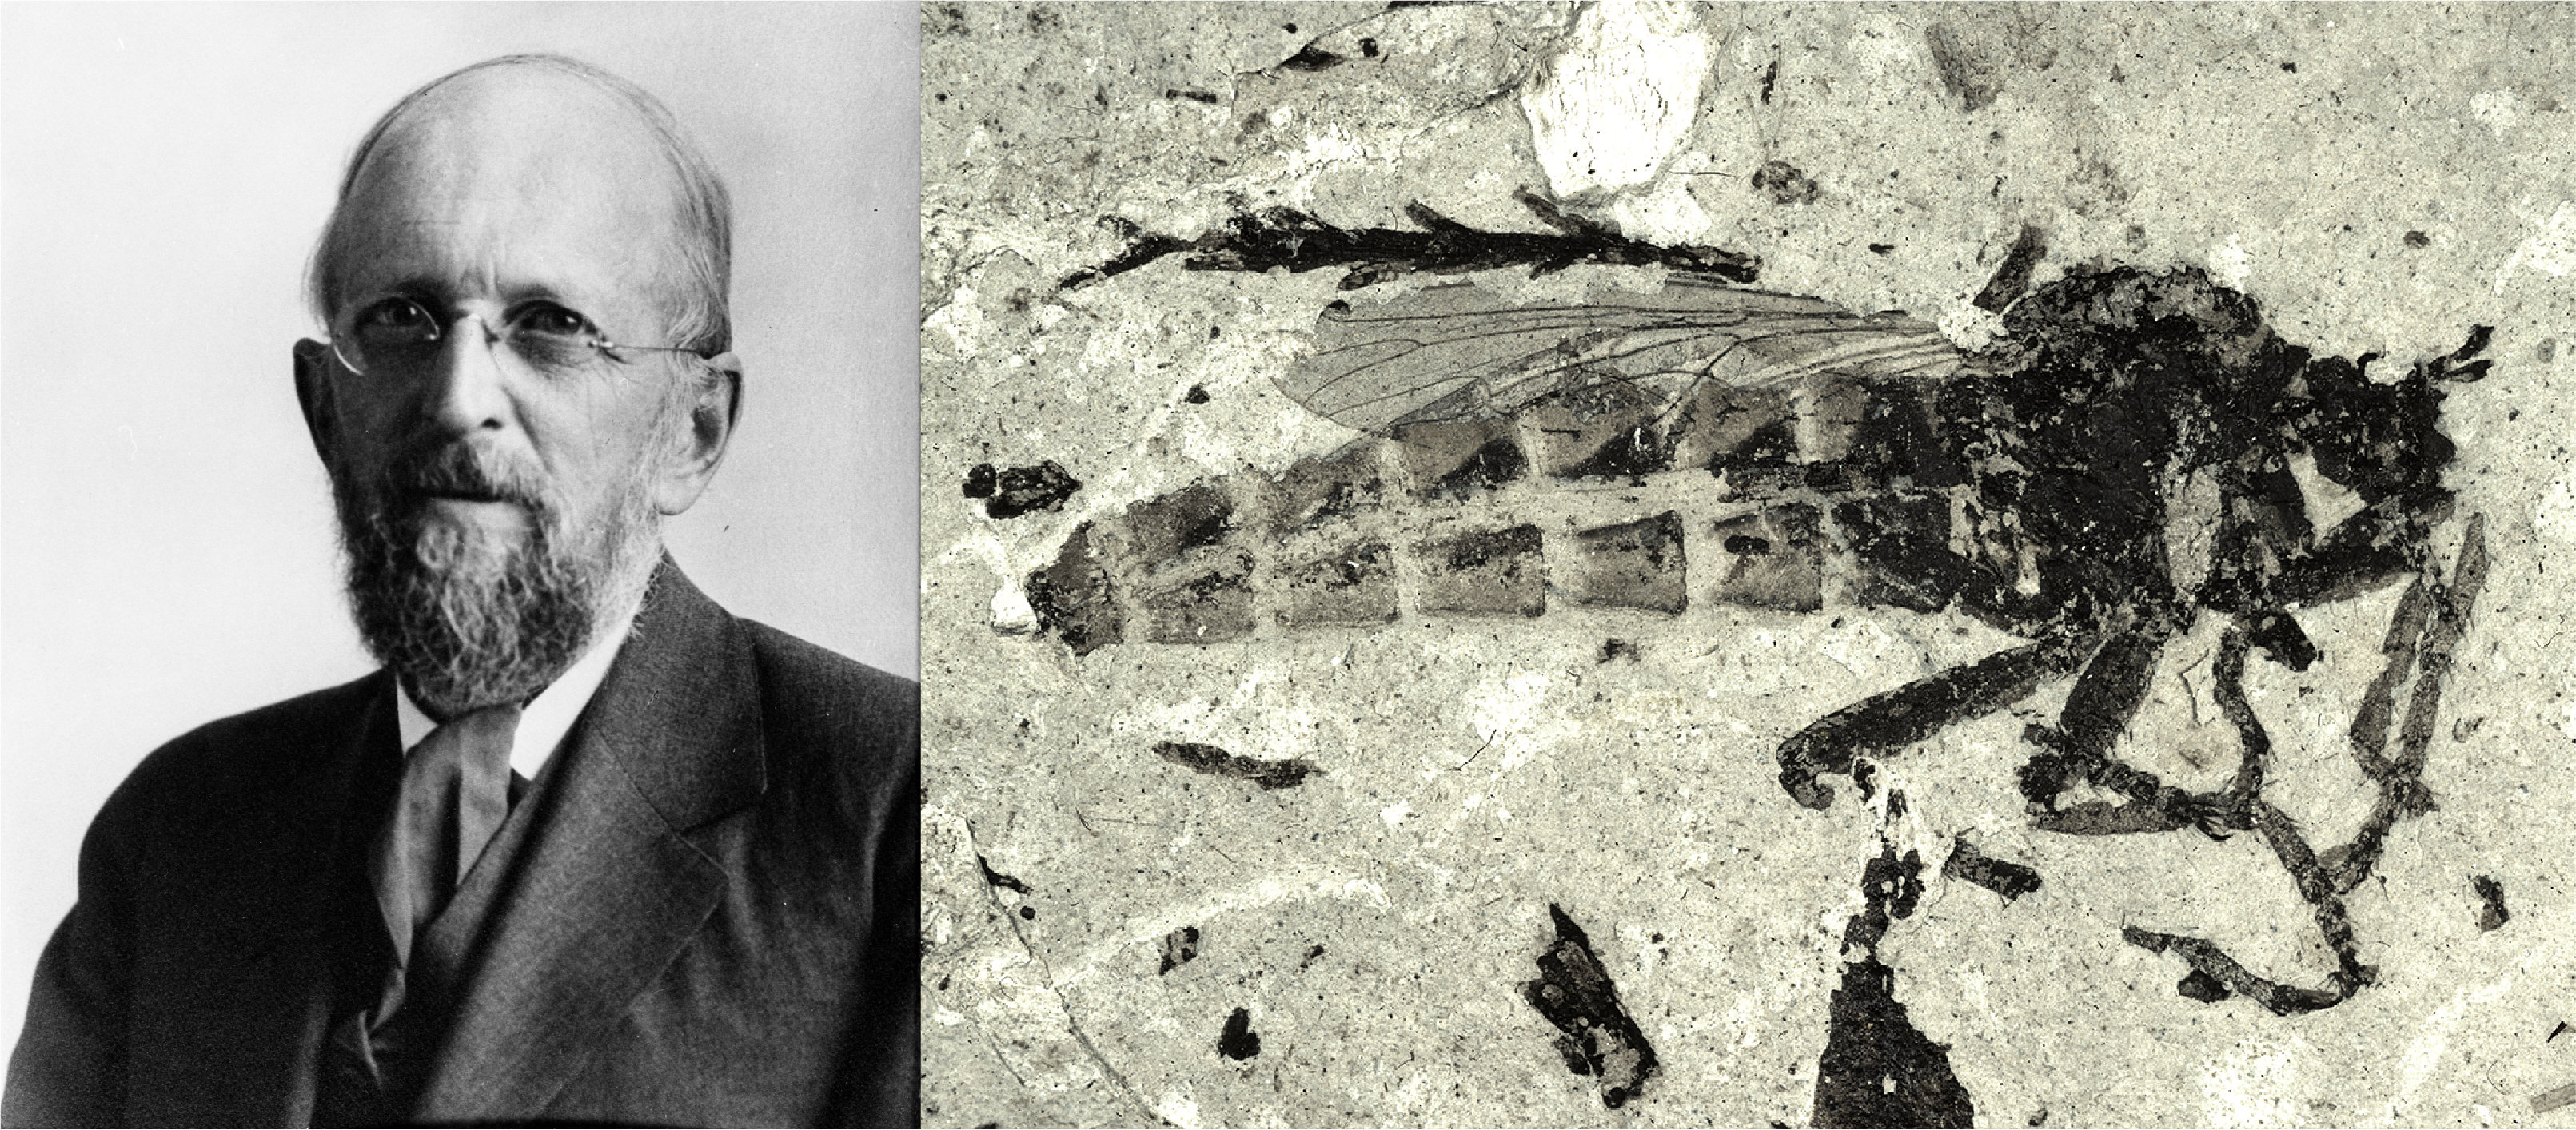 A bearded man in glasses on the left and an insect fossil on the right.